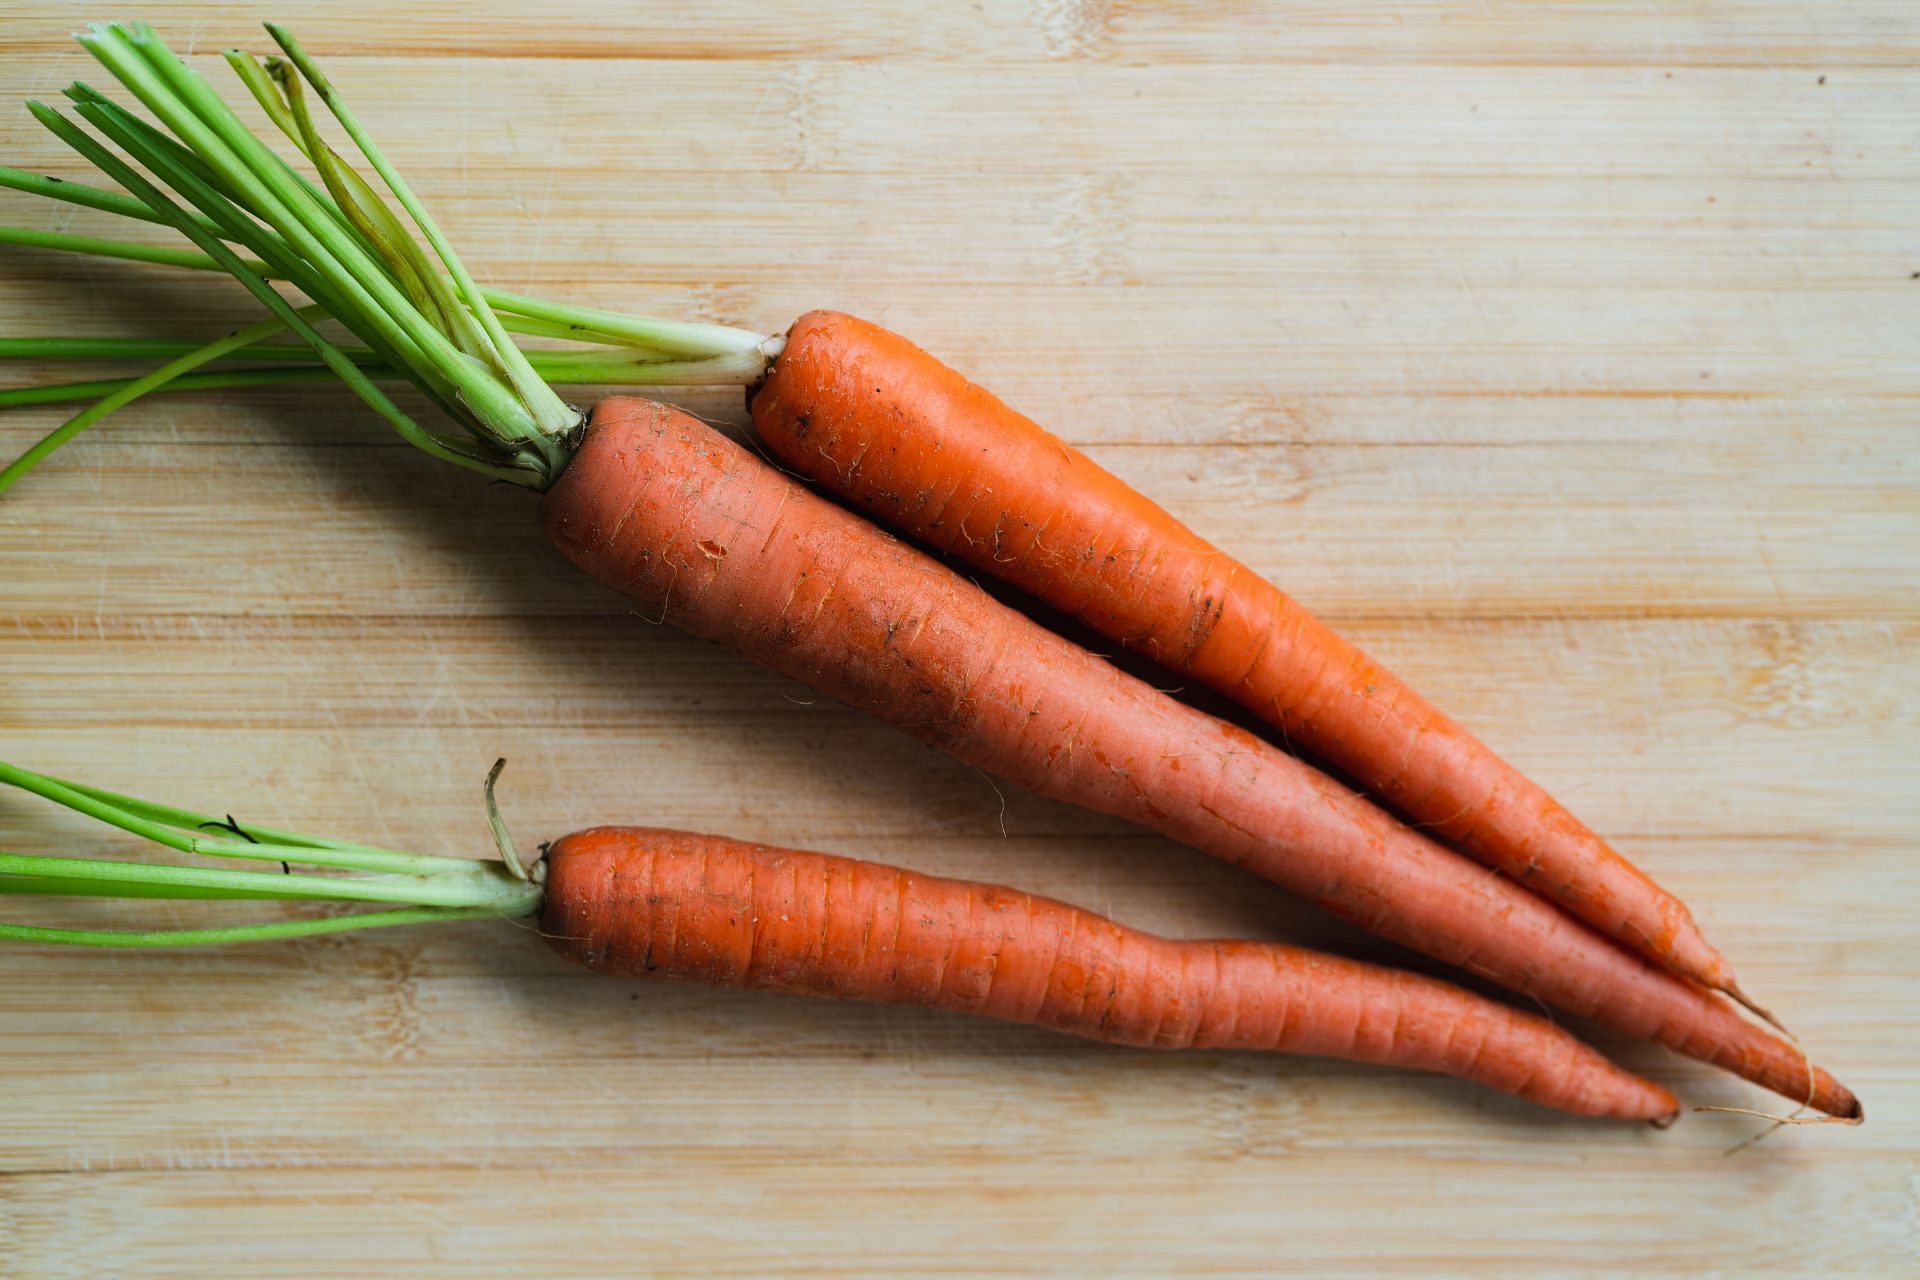 Carrots are also high in vitamin A, which helps boost your immune system. (Image via Unsplash / Armando Arauz)